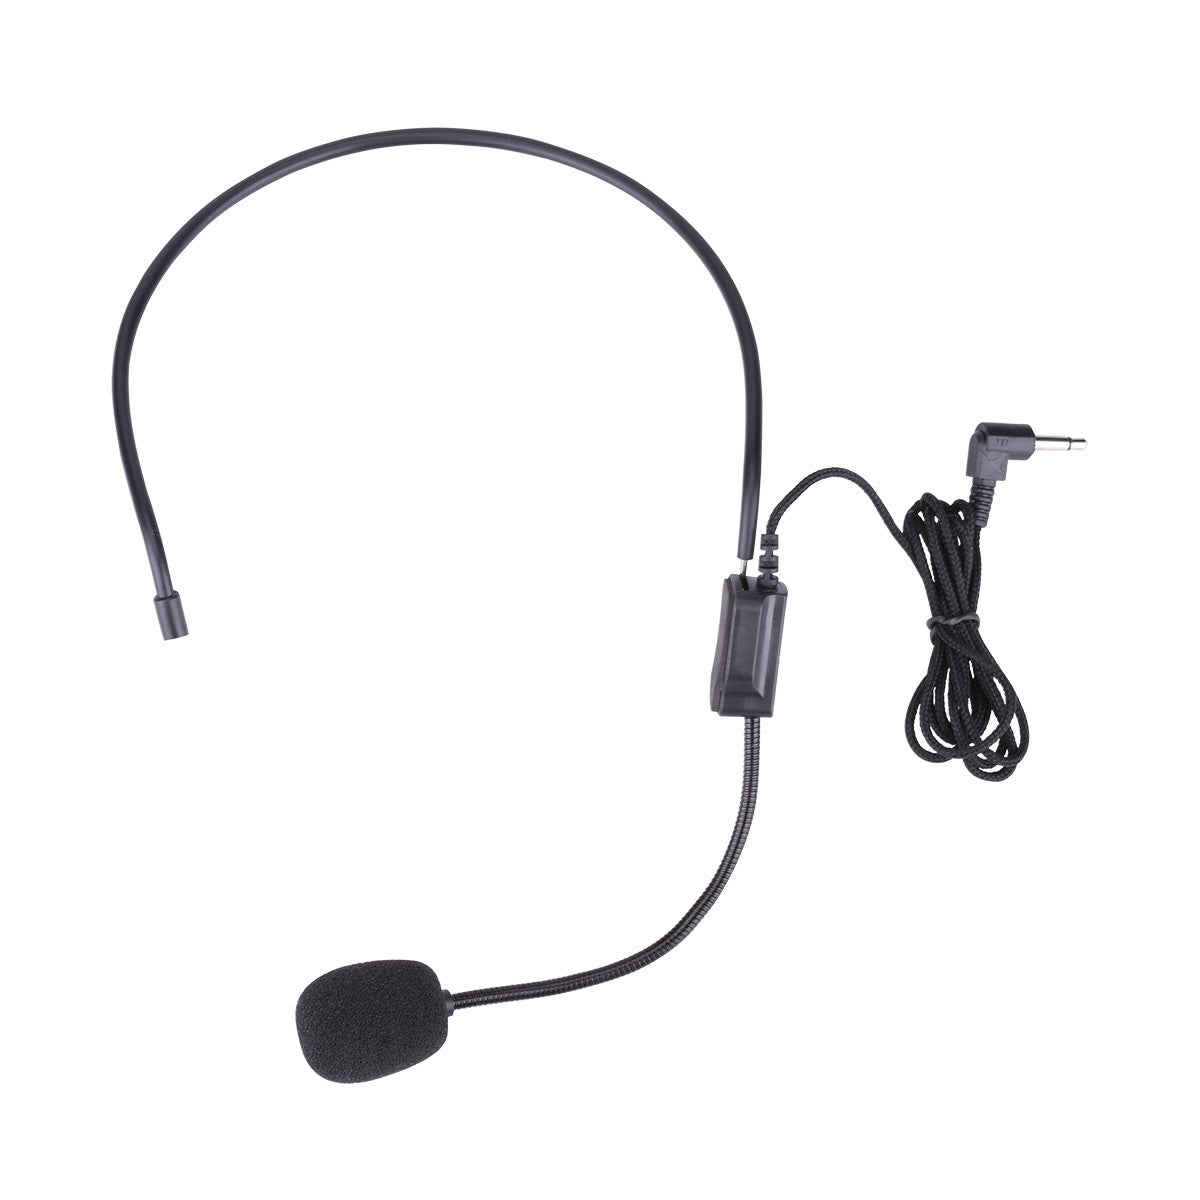 TDM-100 3.5MM Wired Headset with Unidirectional Condenser Mini Microphone (good for Conference talks)